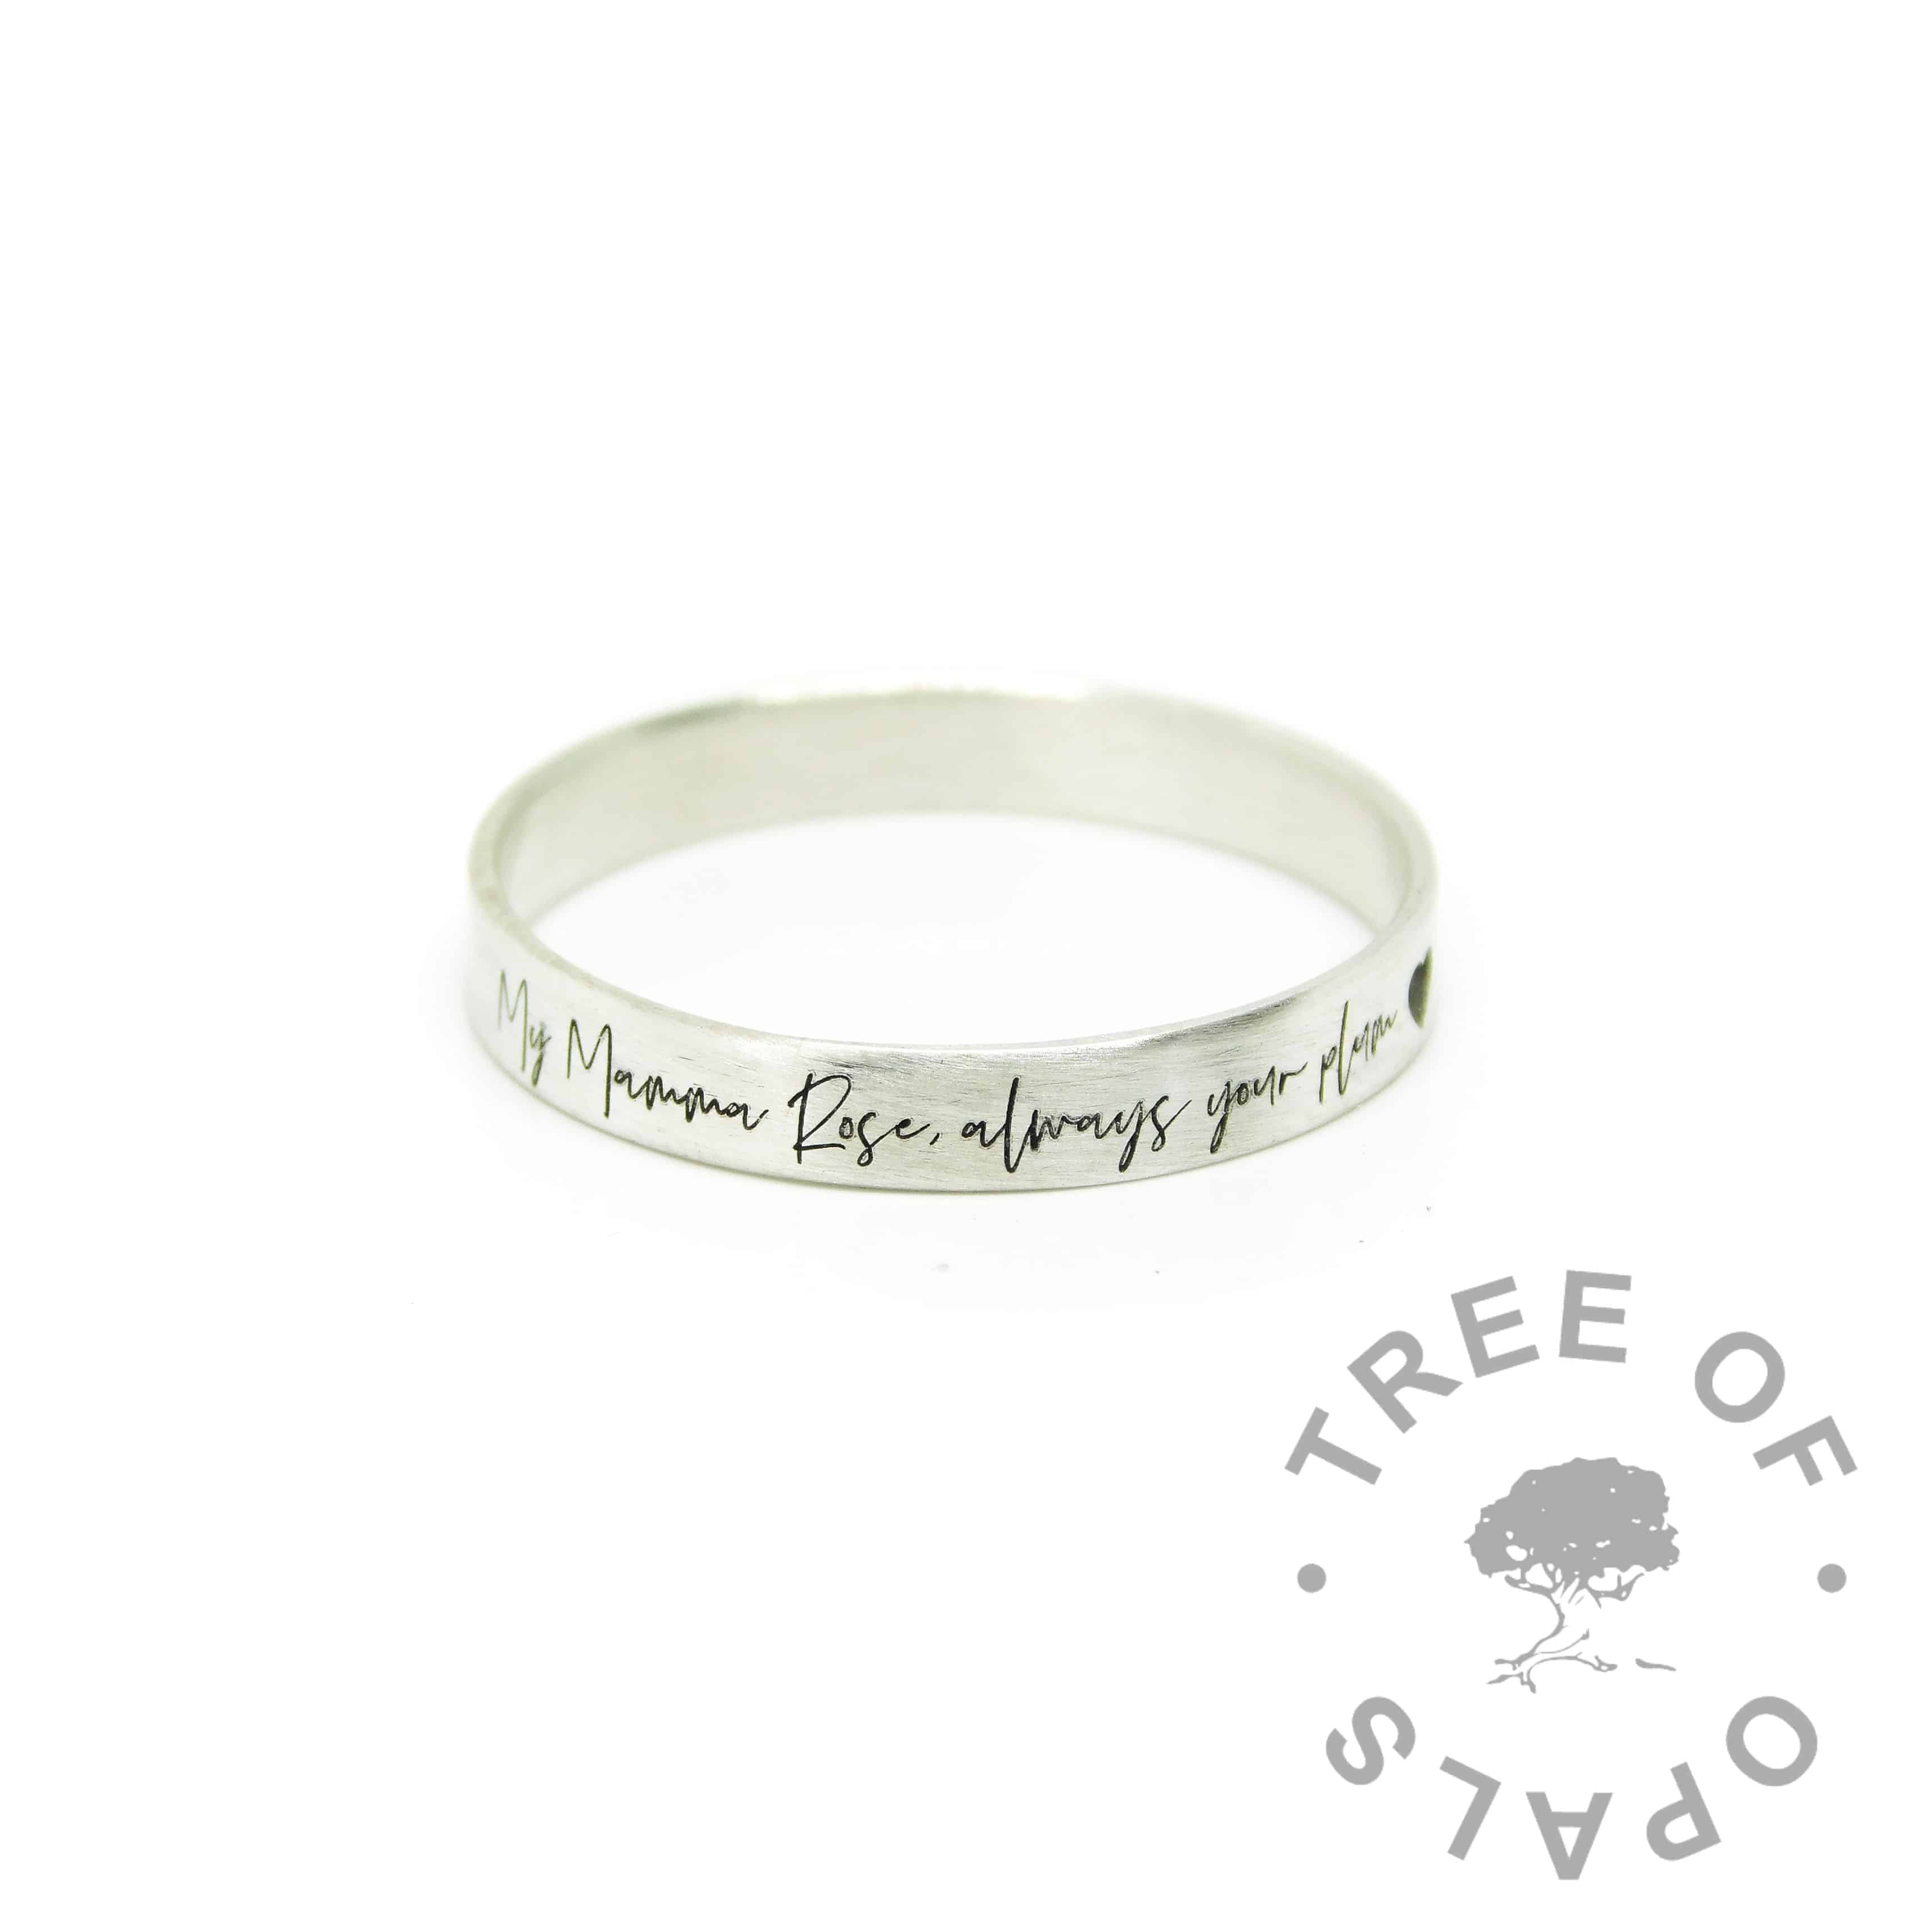 silver south script brushed ring, 3mm wide brushed stacking band, engraved on the outside with heart emoji at the end